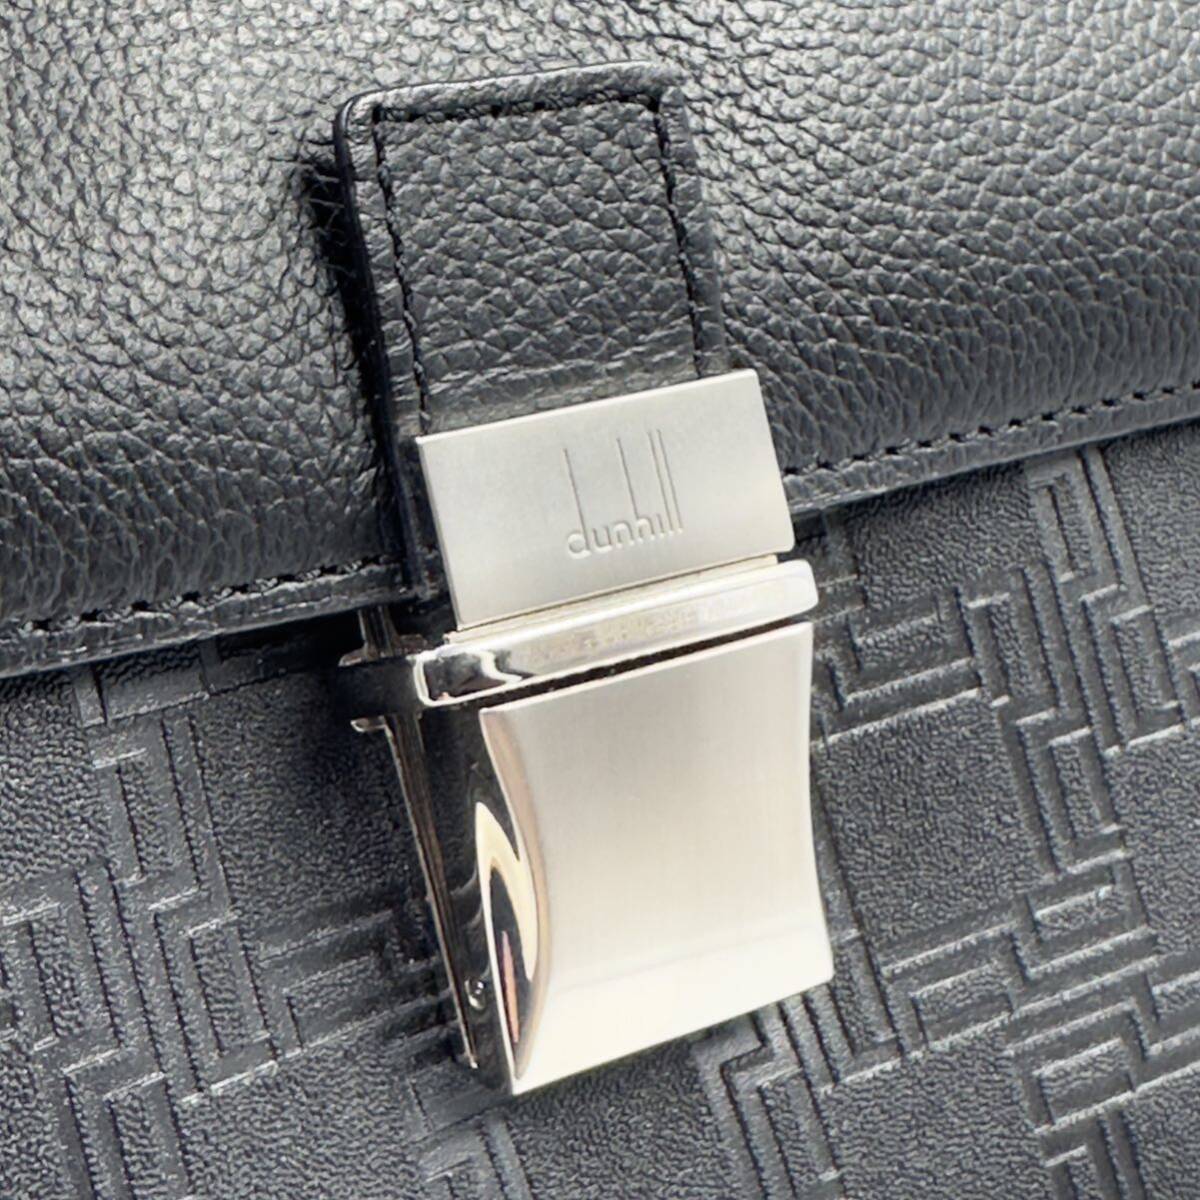 [ regular price 8 ten thousand jpy ] high class goods dunhill Dunhill navy blue Note highest leather clutch bag second bag business bag silver metal fittings men's black 